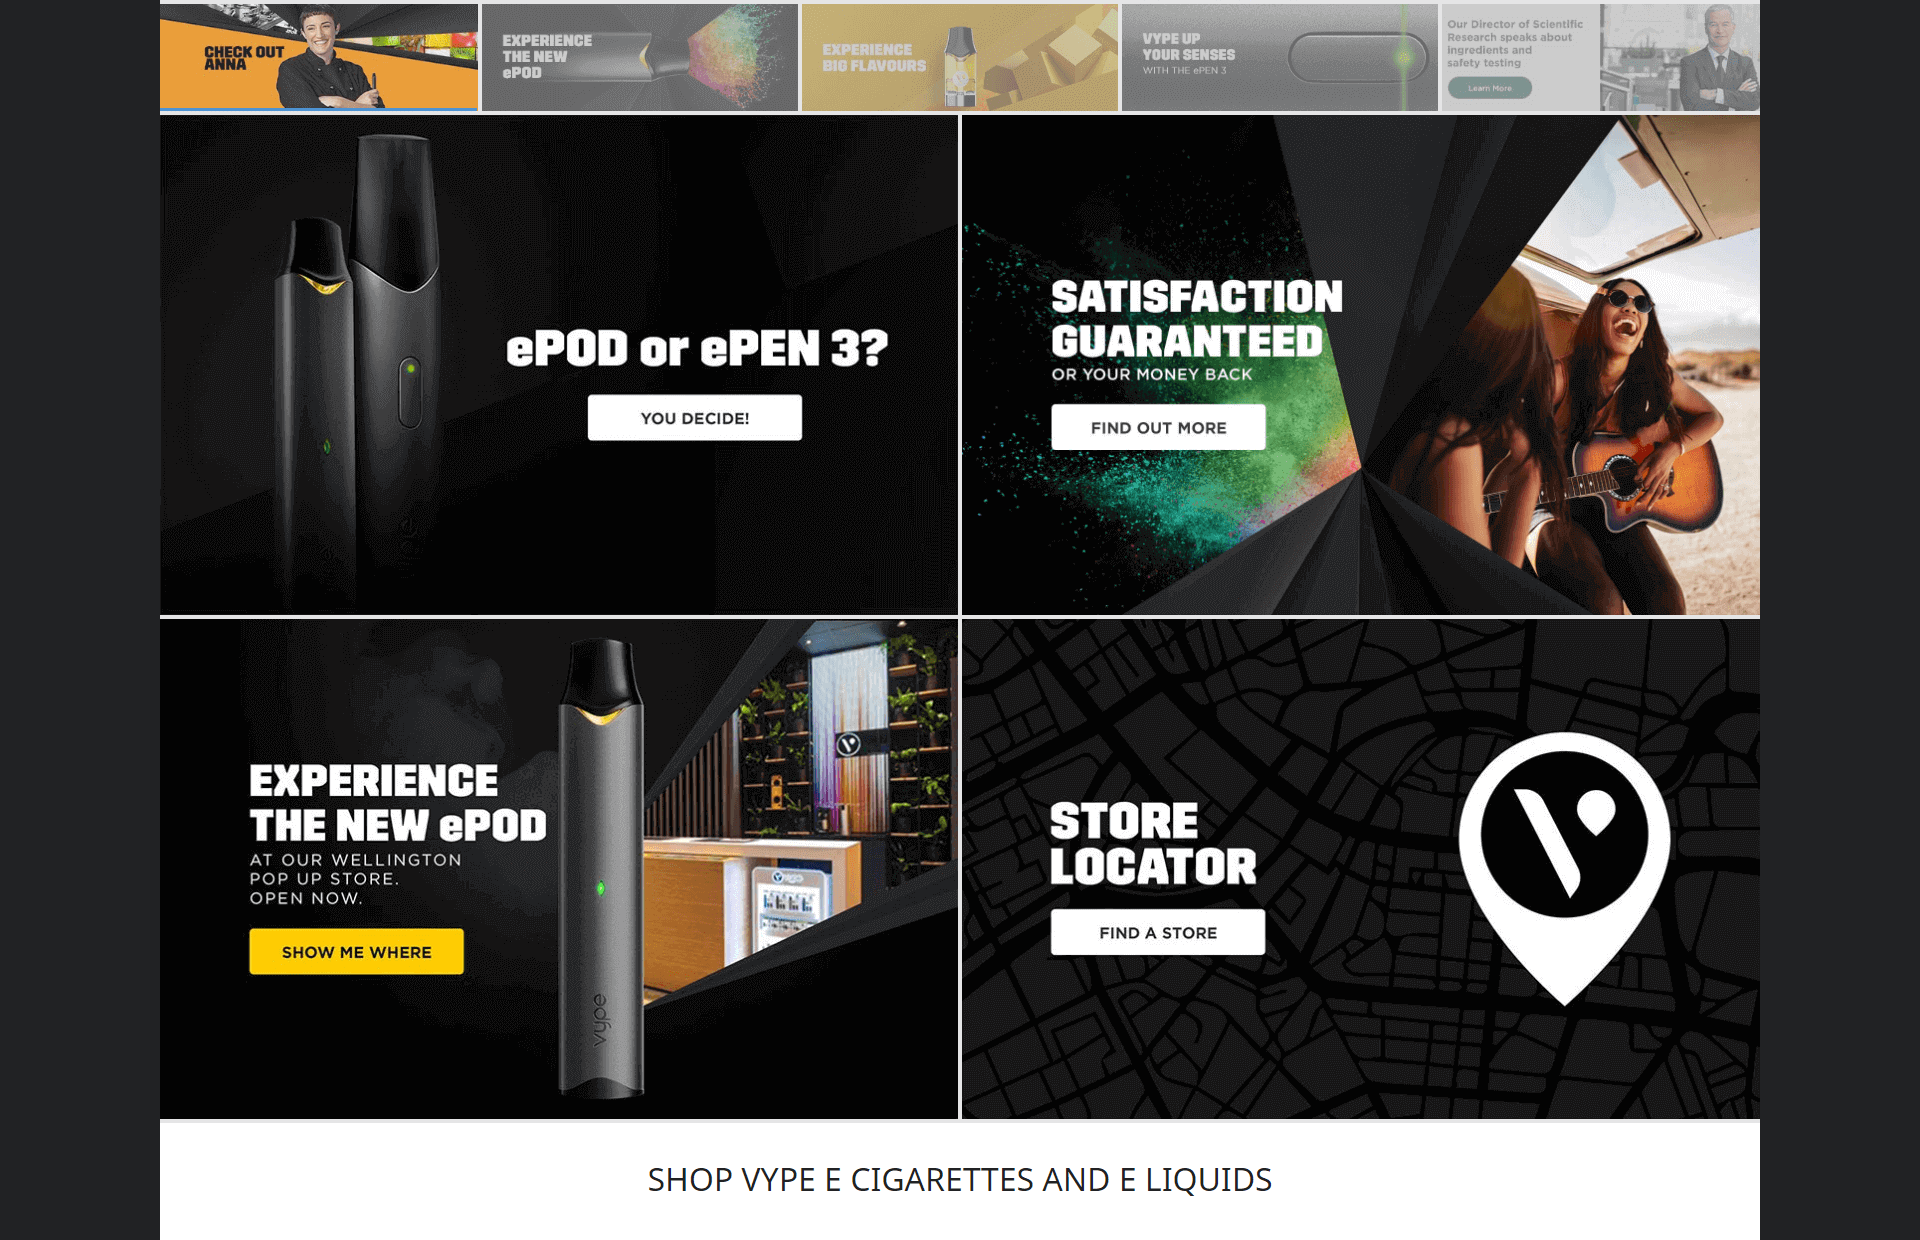 Previous Vuse homepage images